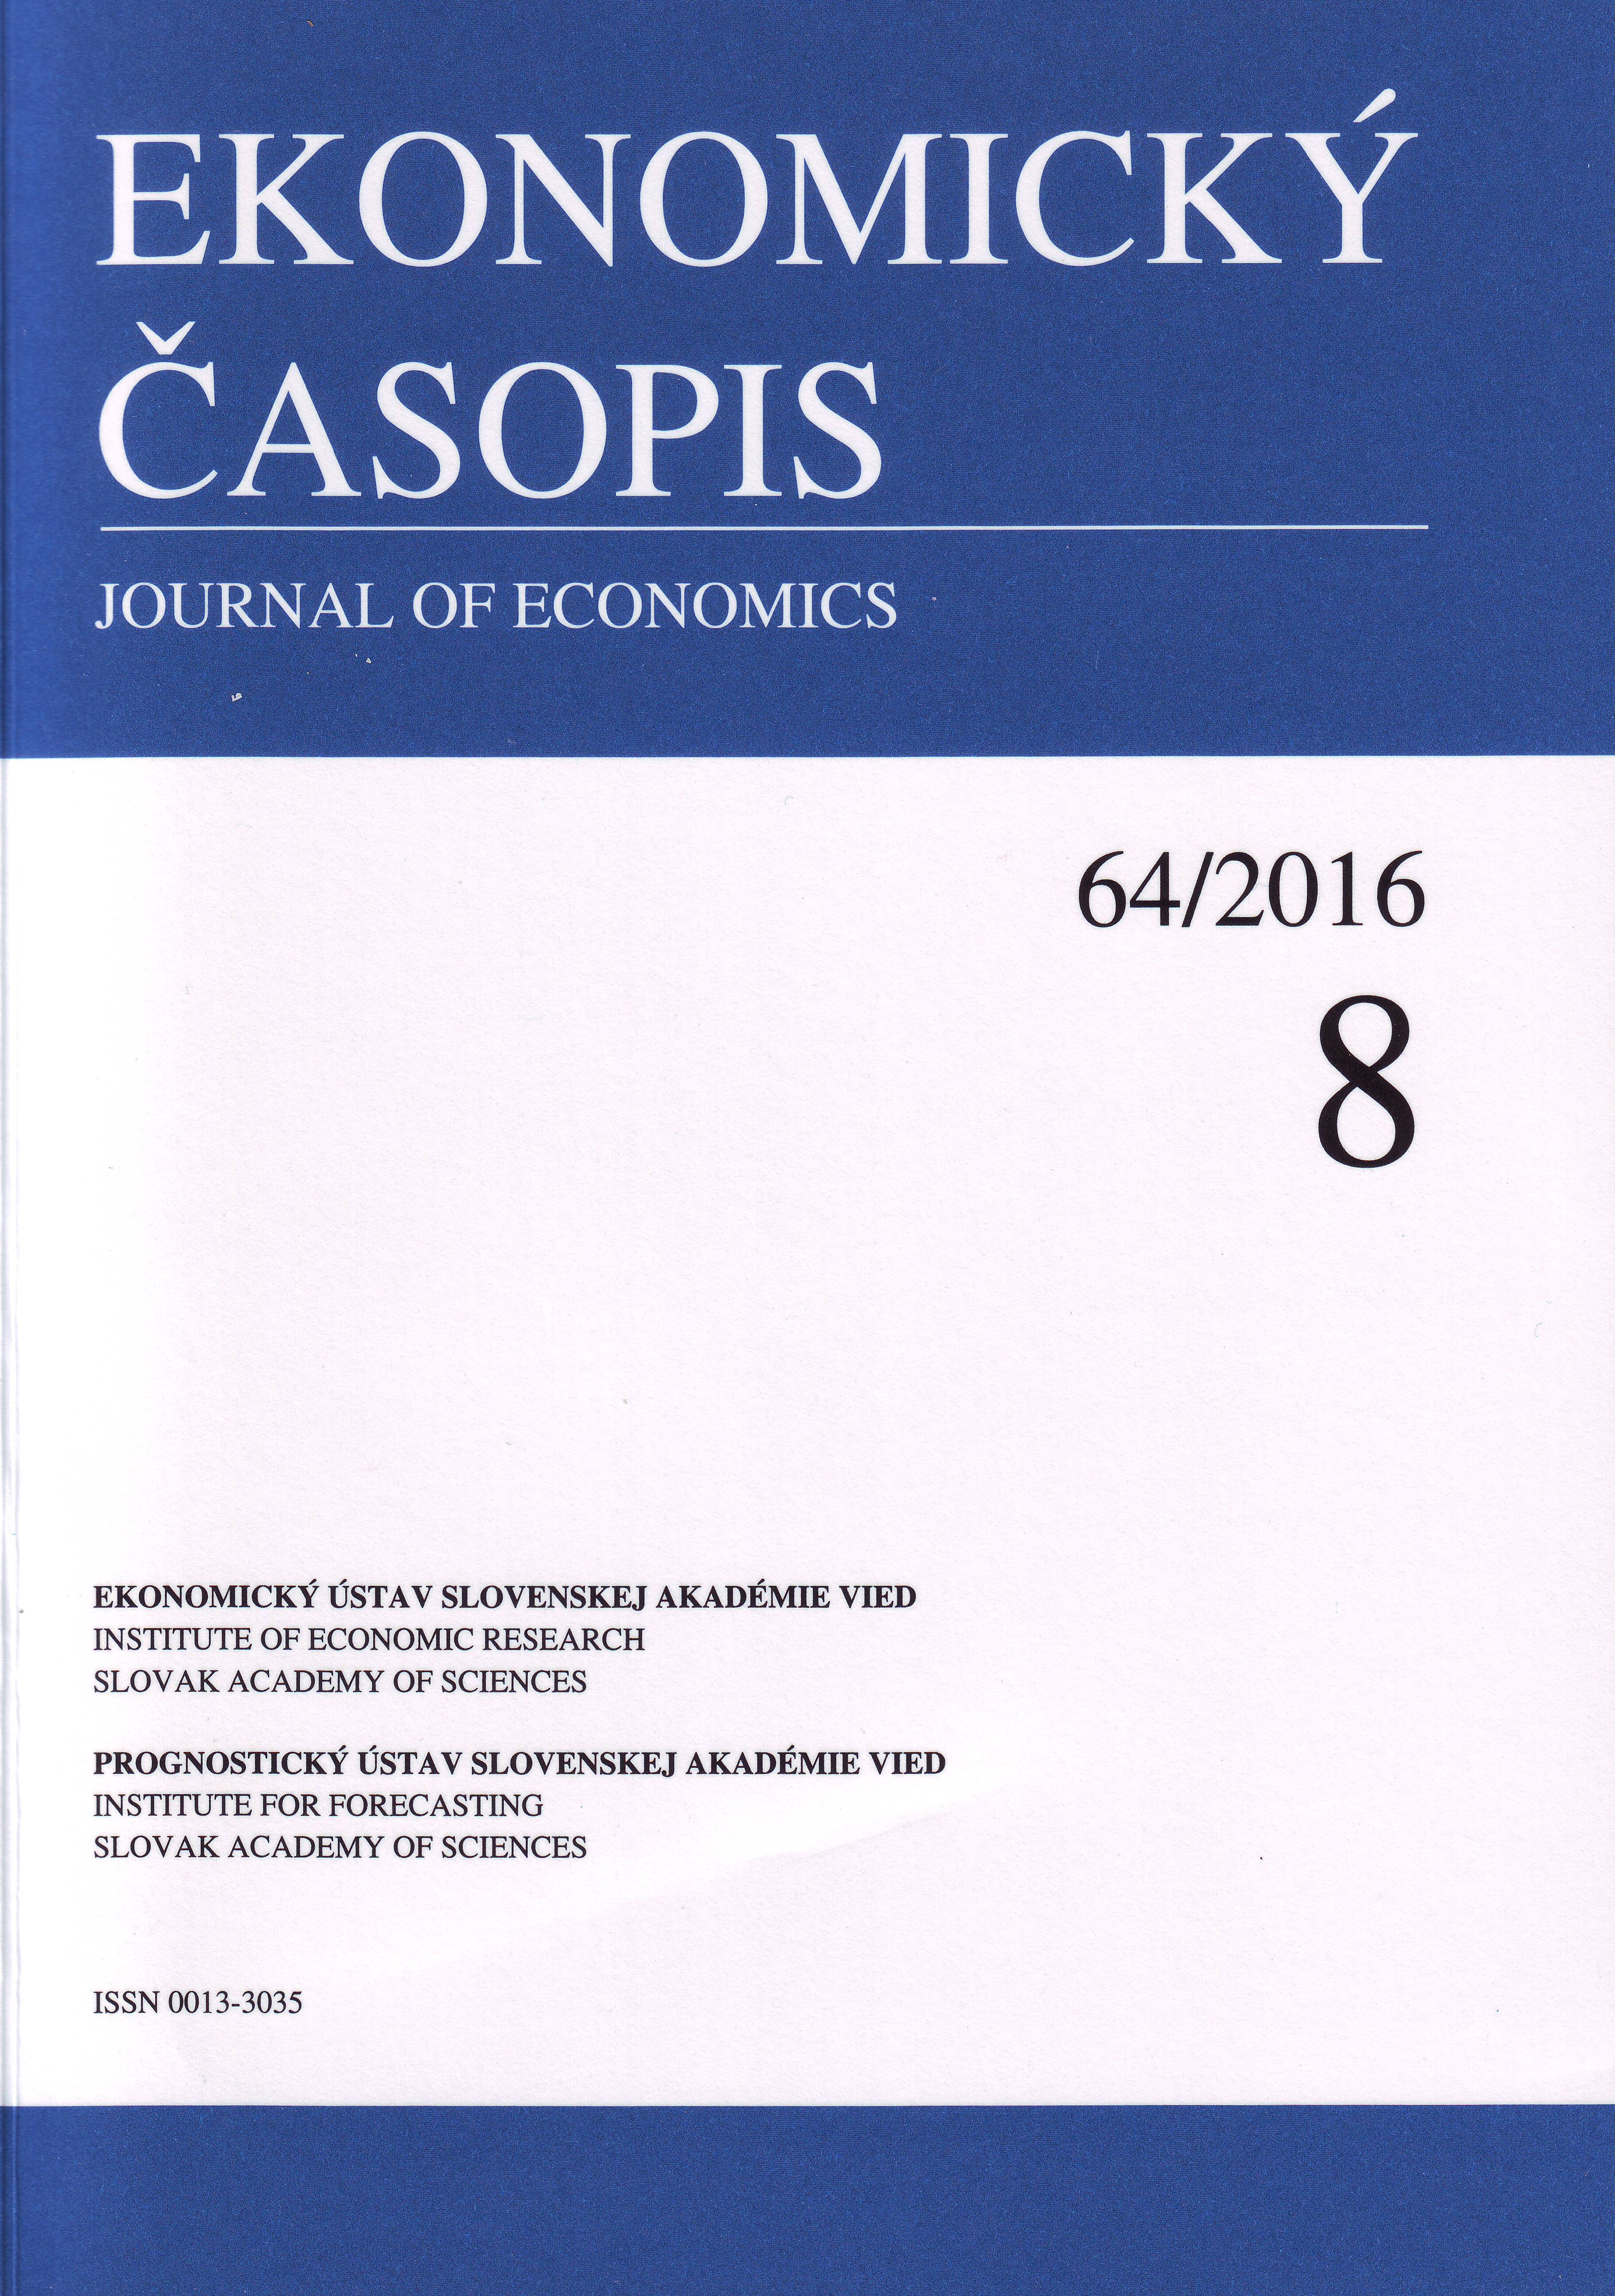 Perception of the Reform of the Tax System in the Slovak Republic by Business Entities and Financial Administration Cover Image